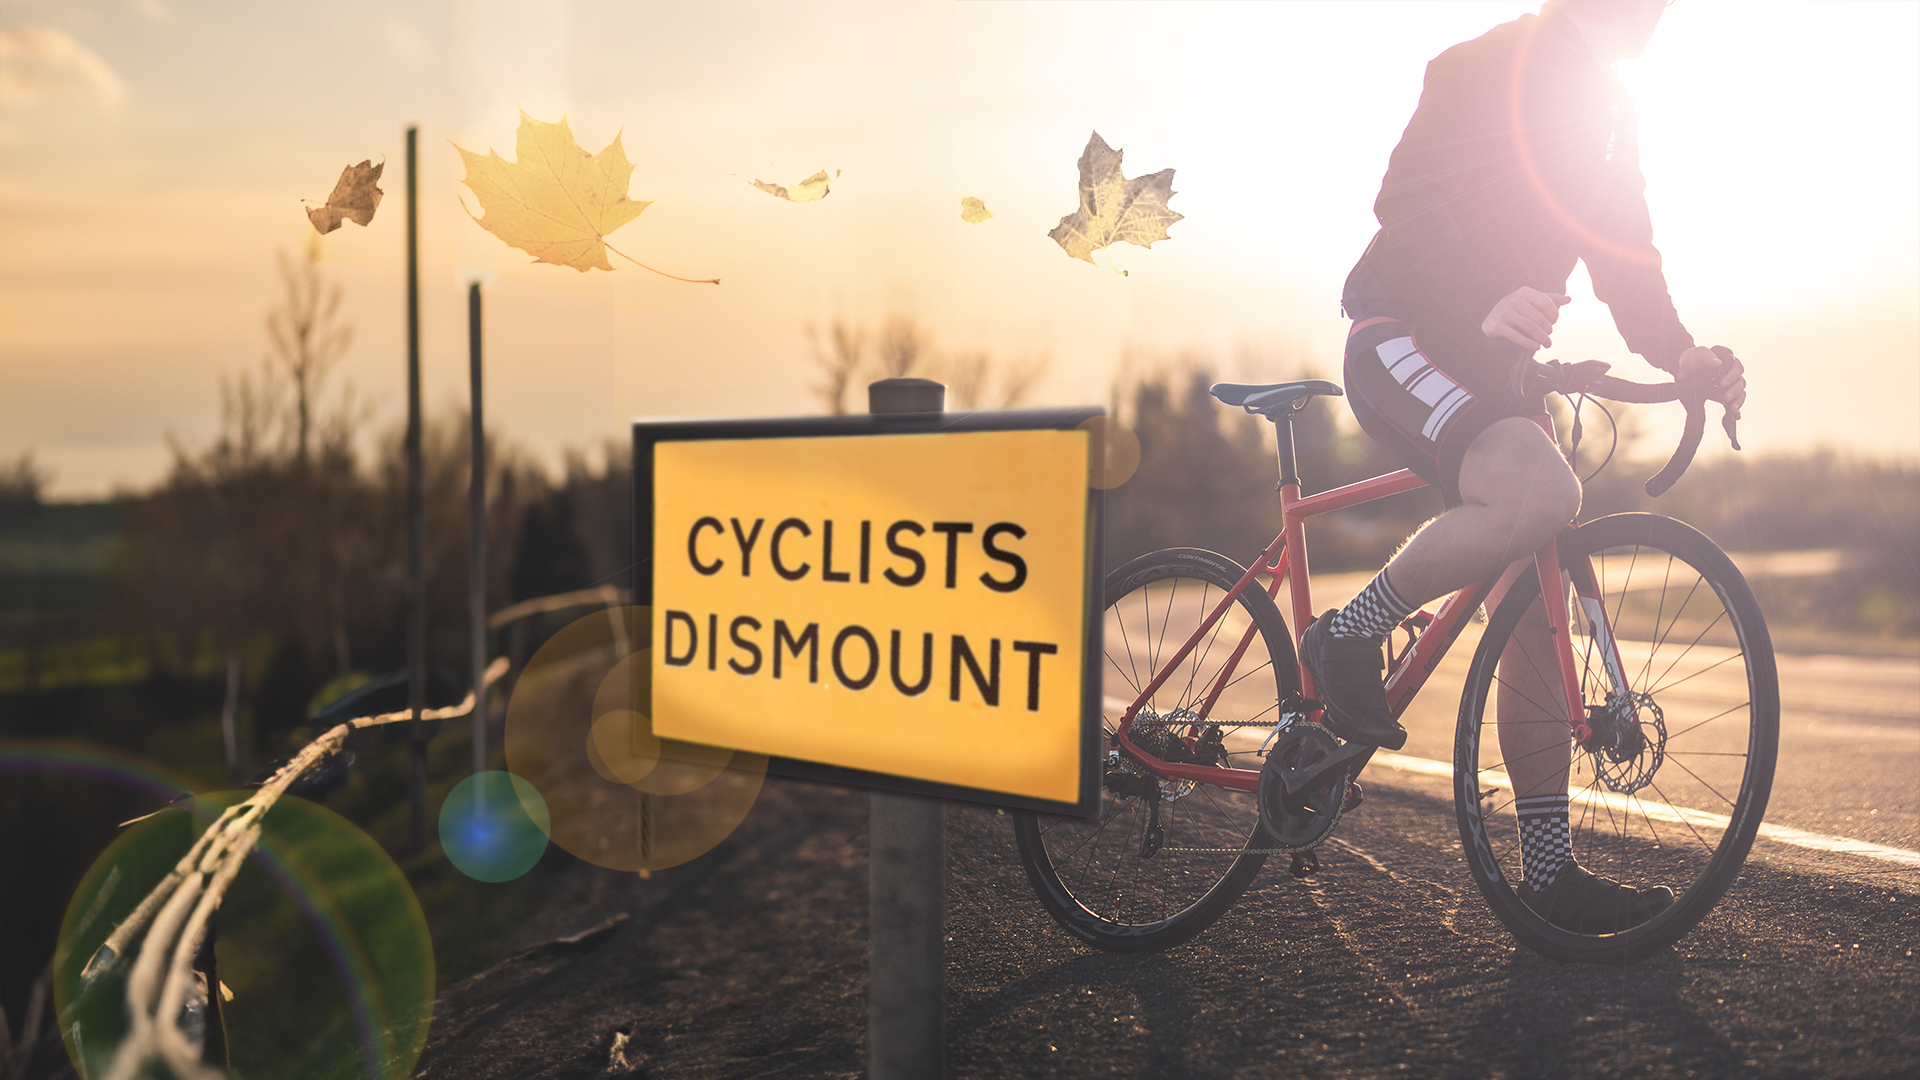 Cyclists Dismount says the roadsign, a metaphor for how businesses might live more seasonally